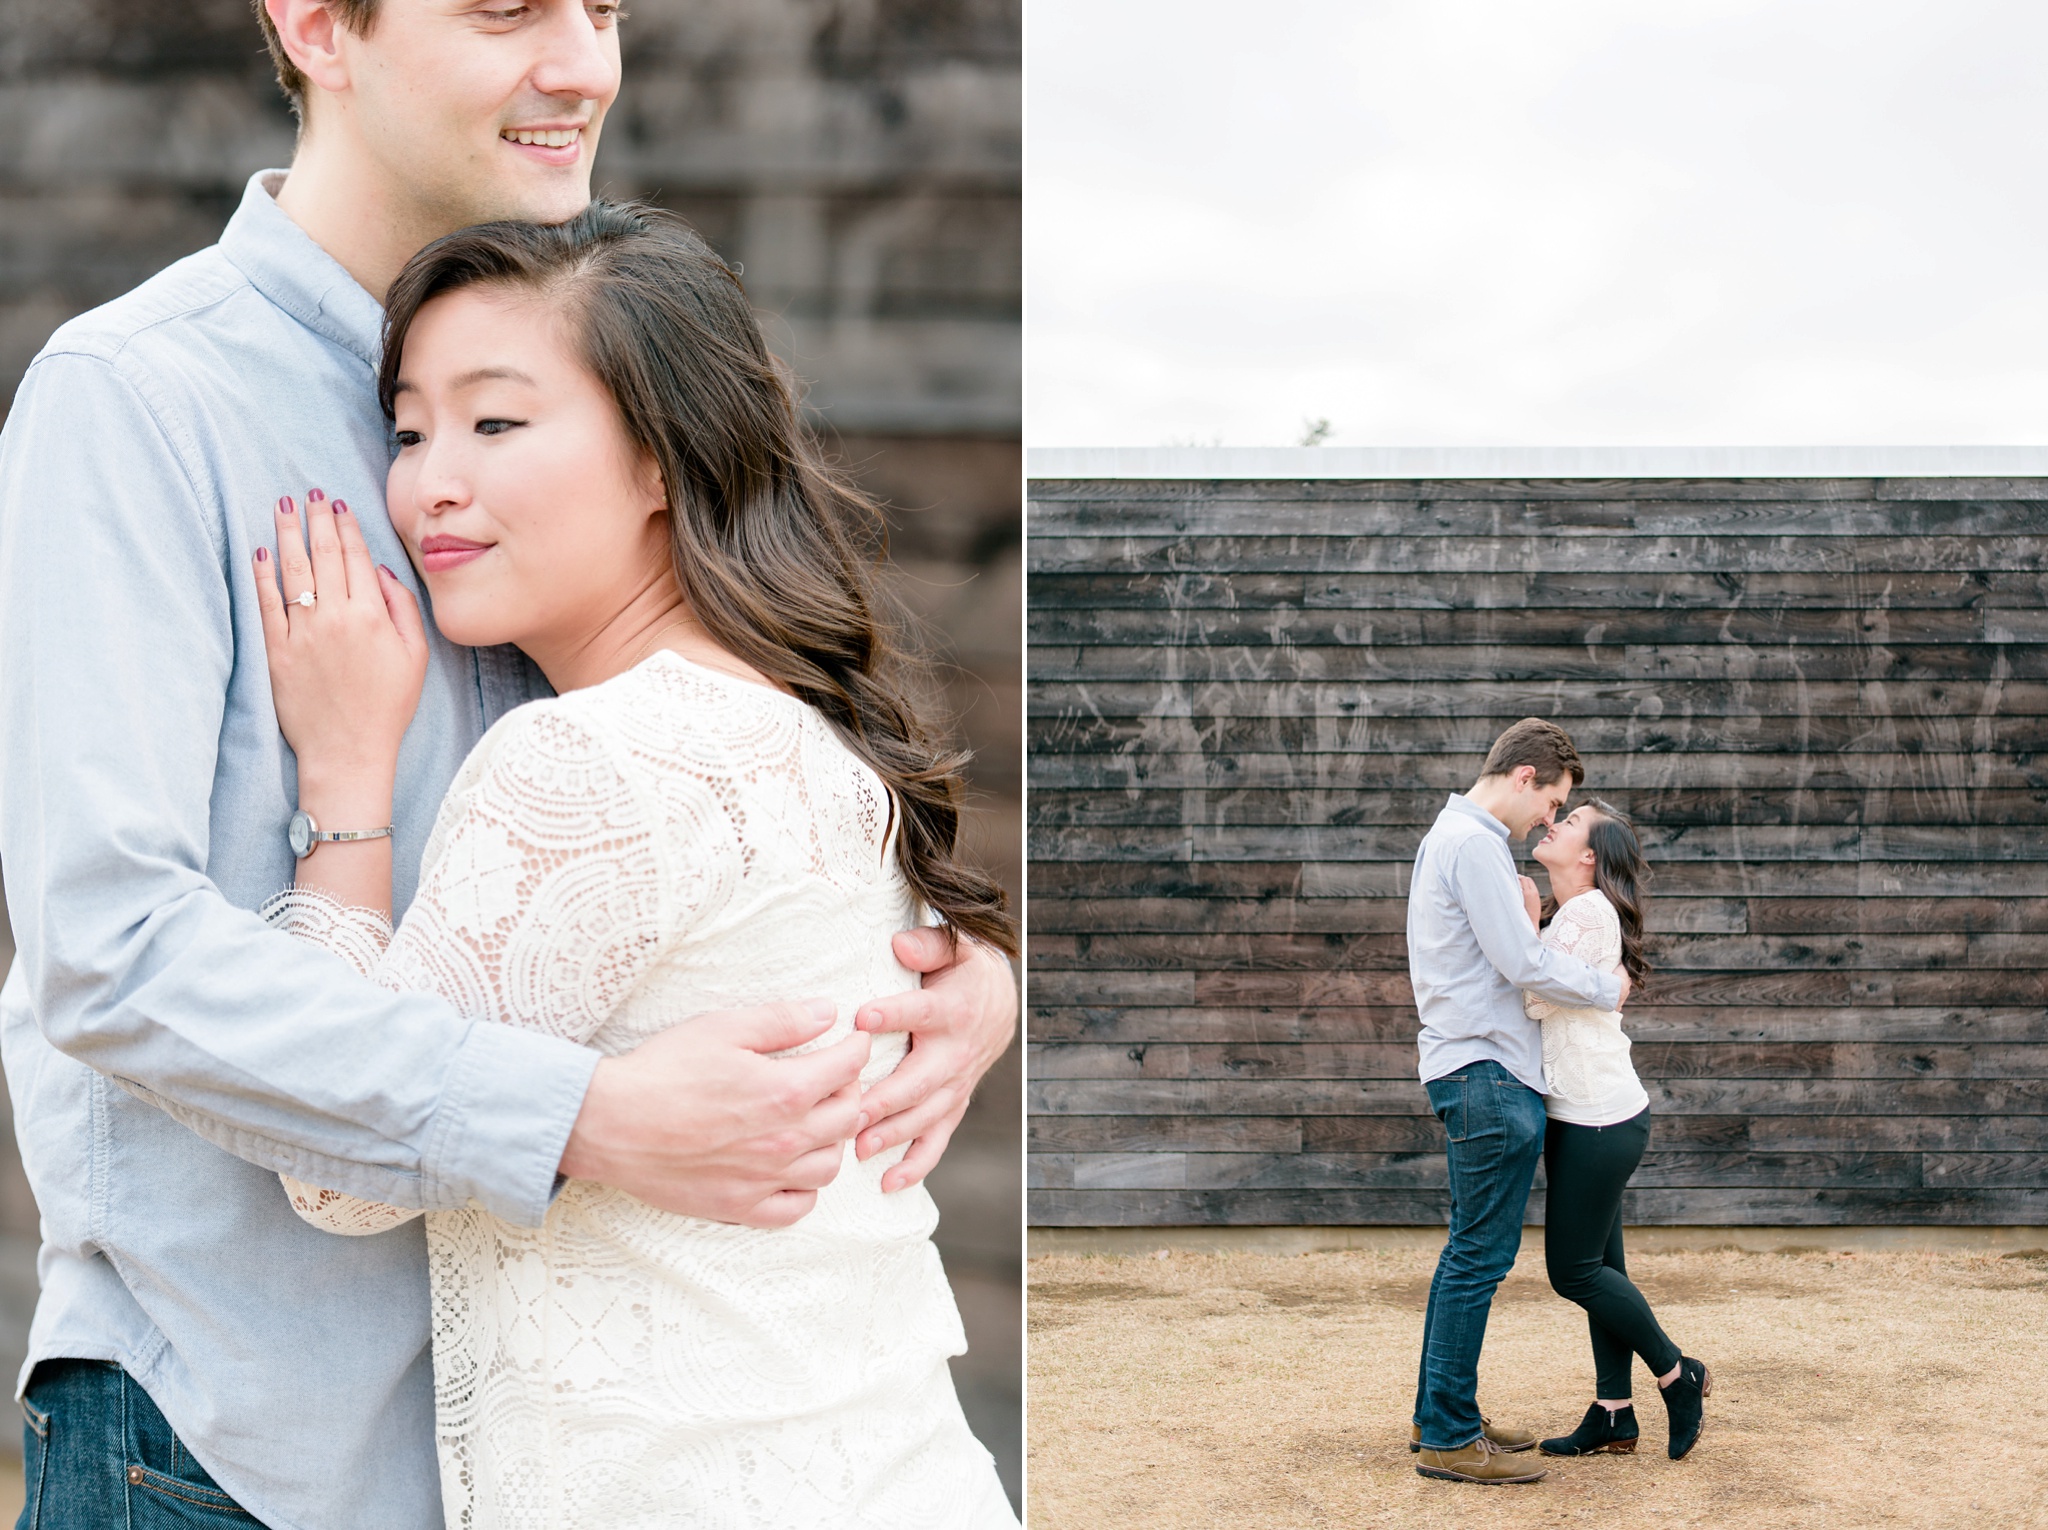 Downtown Nice to Have You in Birmingham Engagement Session| Birmingham Alabama Wedding Photographers_0010.jpg